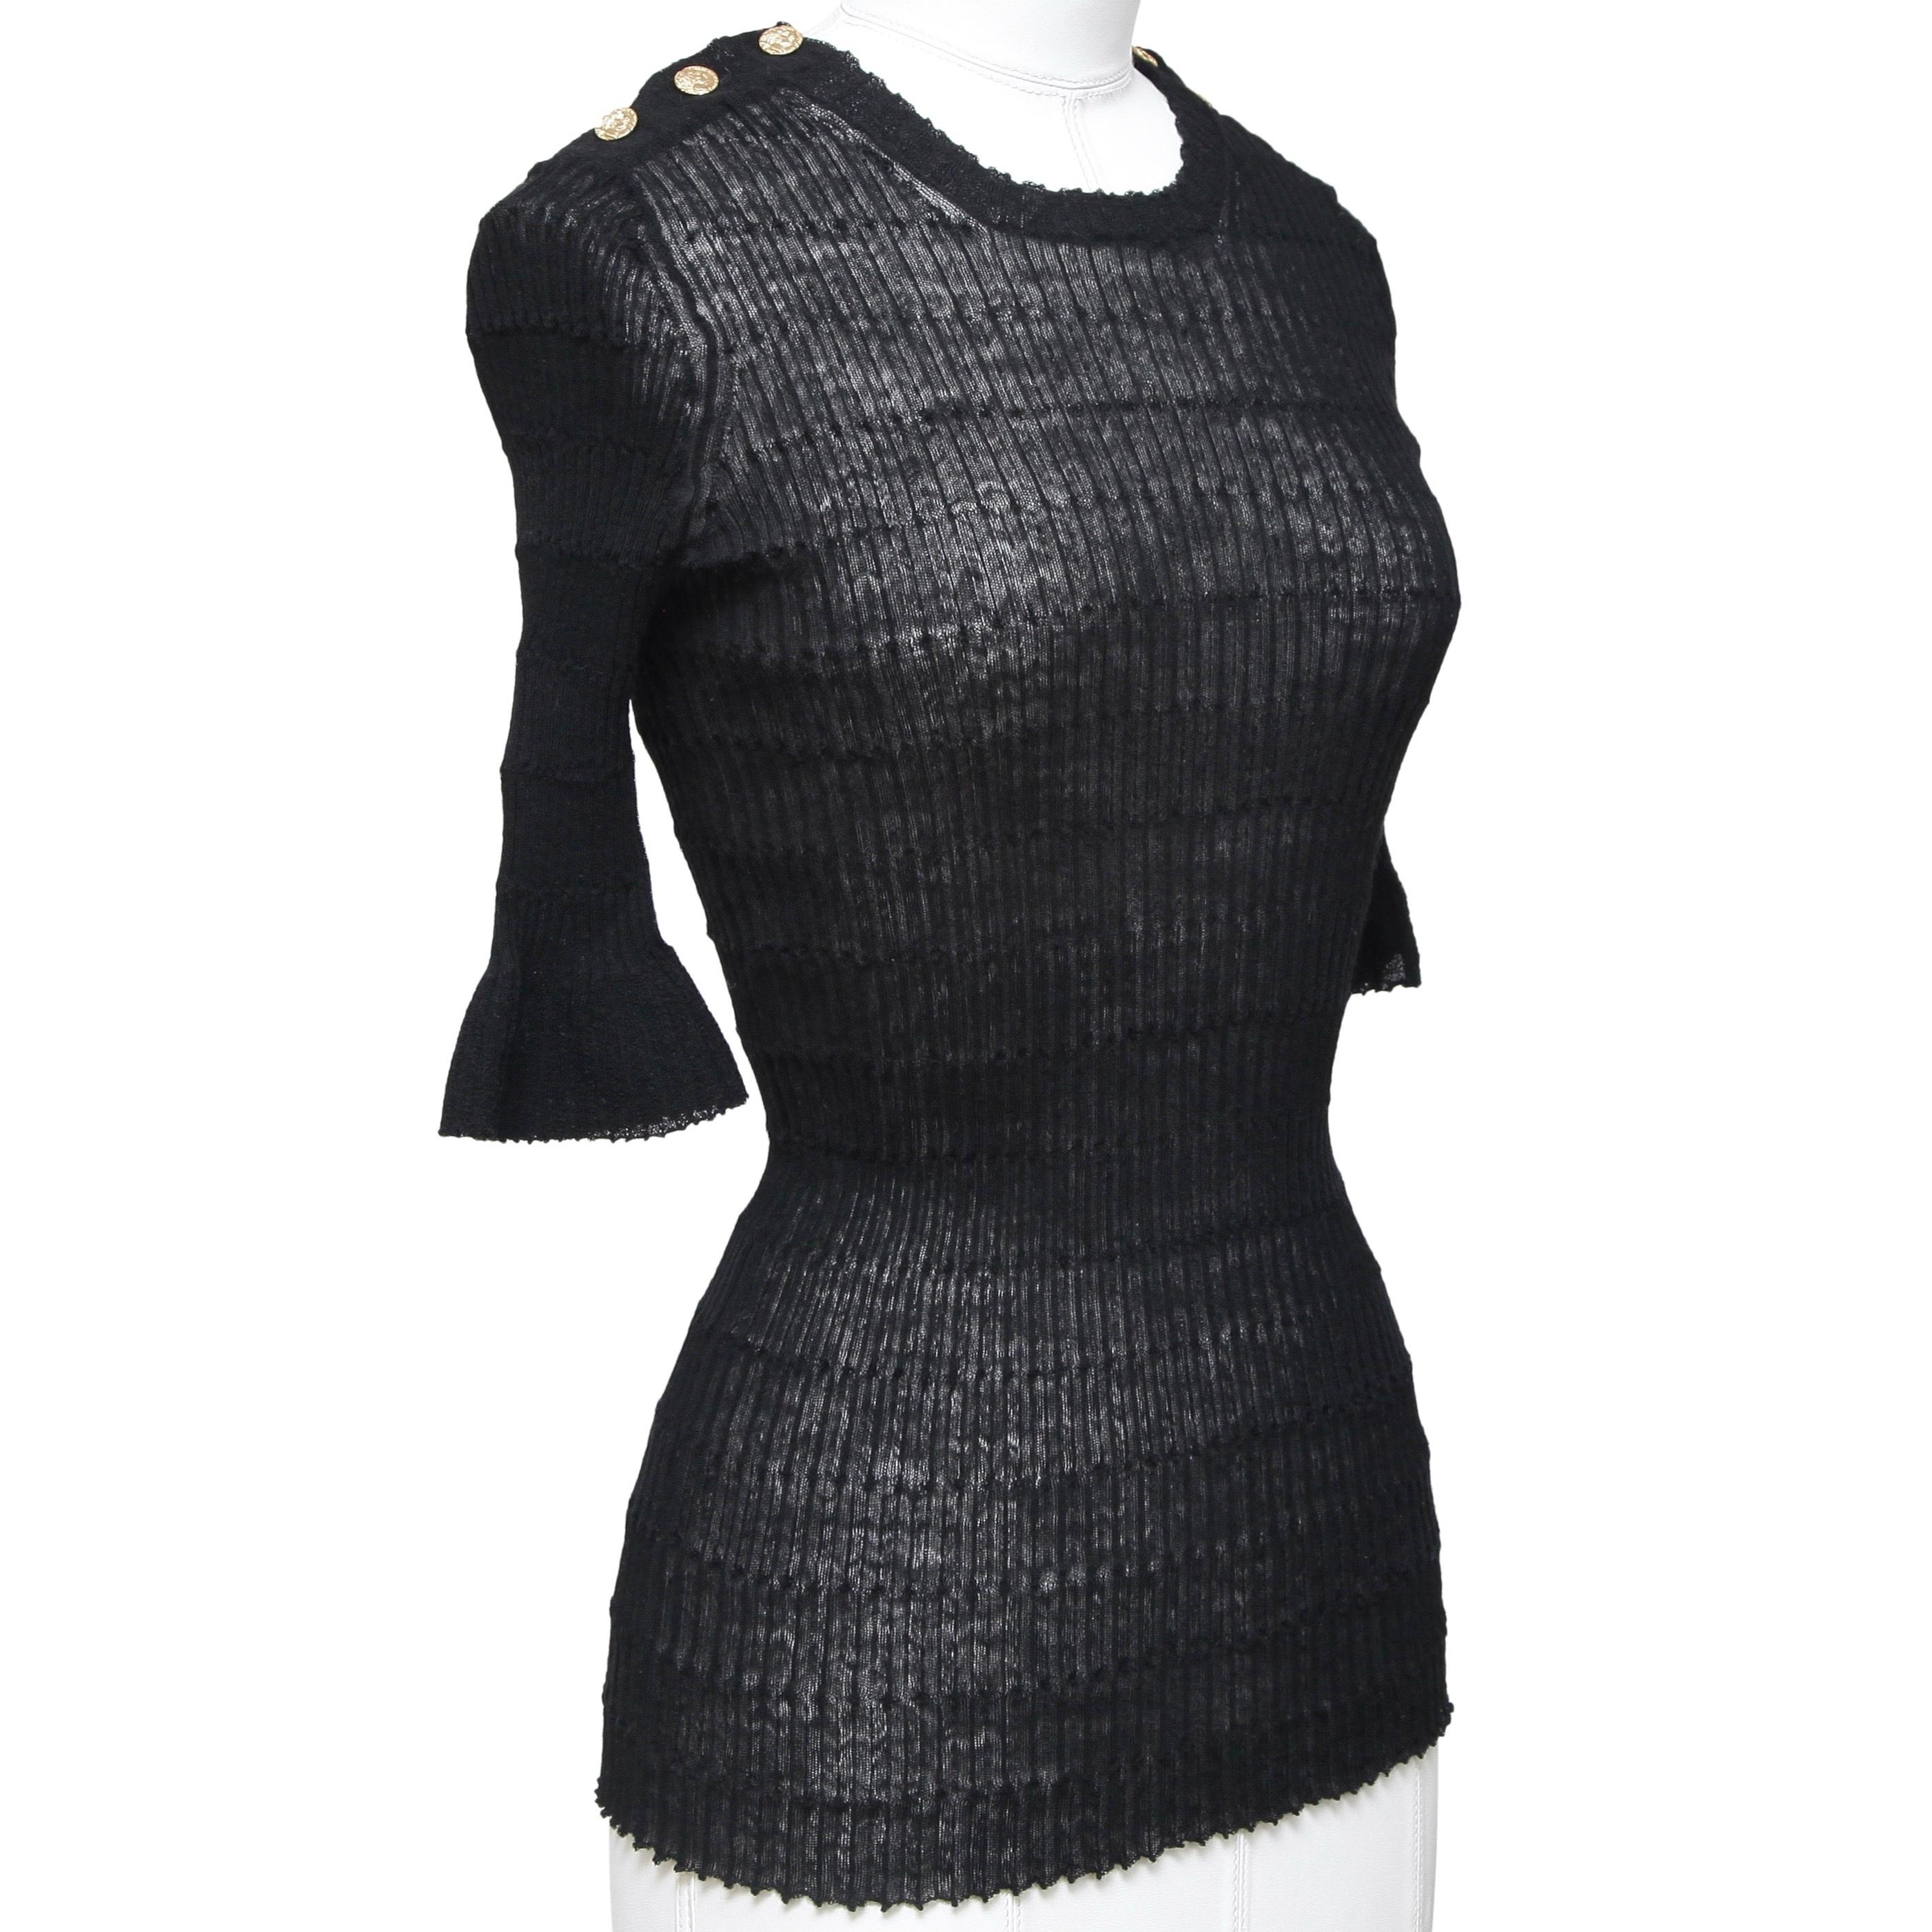 GUARANTEED AUTHENTIC CHANEL 2016 ROME COLLECTION BLACK SEMI-SHEER KNIT

Design:
- Ever-so lightly semi-sheer knit top from the 2016 Rome Collection.
- Crew neck.
- Collection themed buttons on each shoulder.
- Slip on.

Size: 34

Measurements